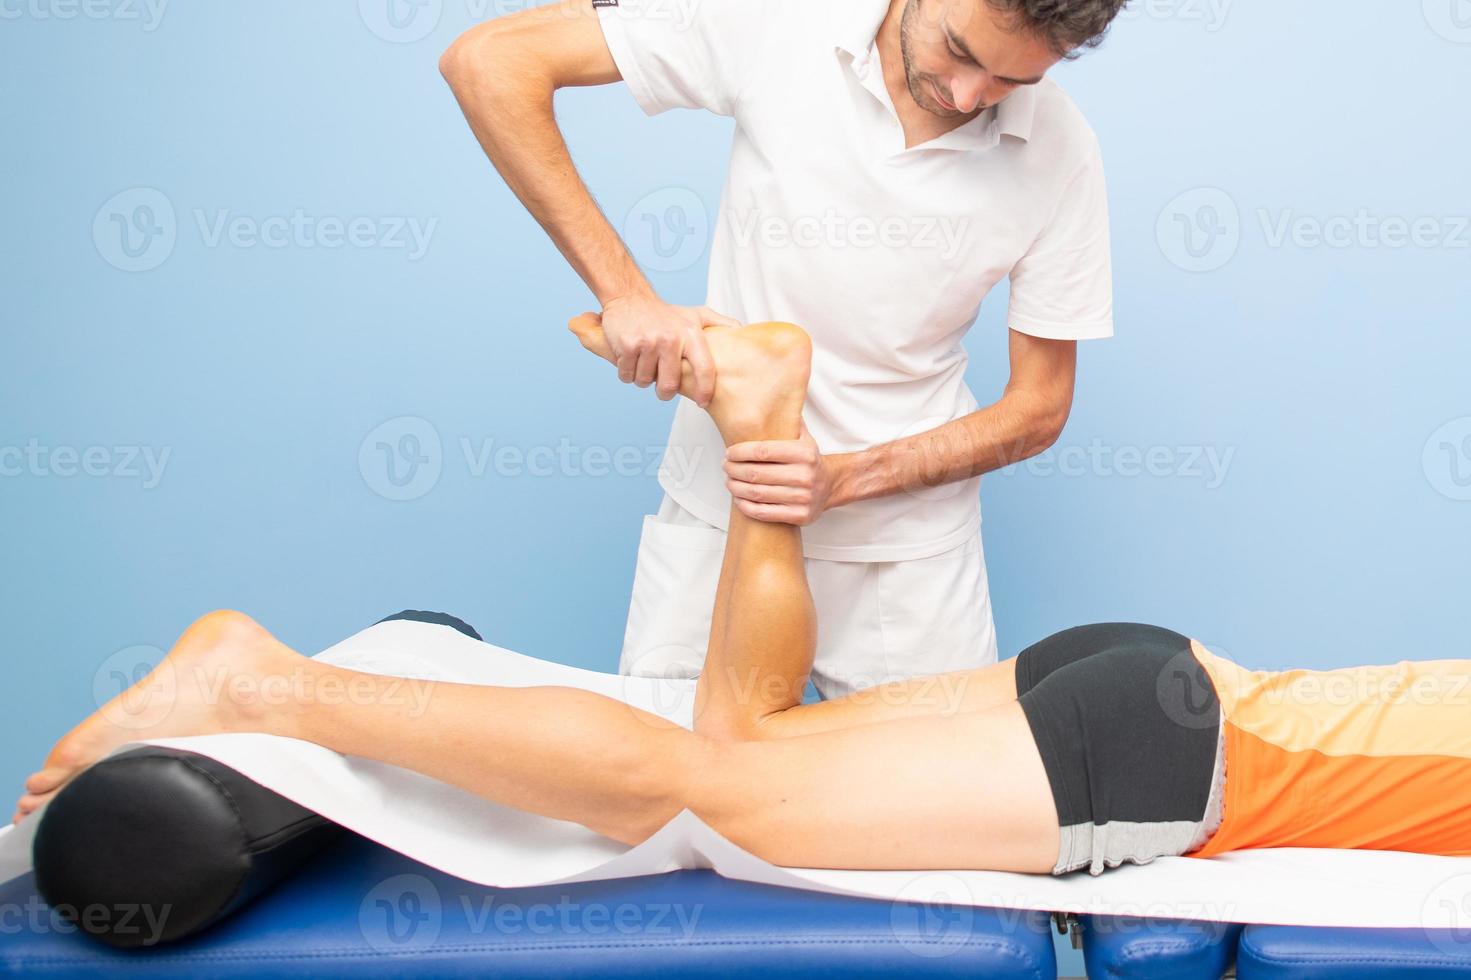 Physiotherapy practice tibio-tarsal mobilization to an athlete photo